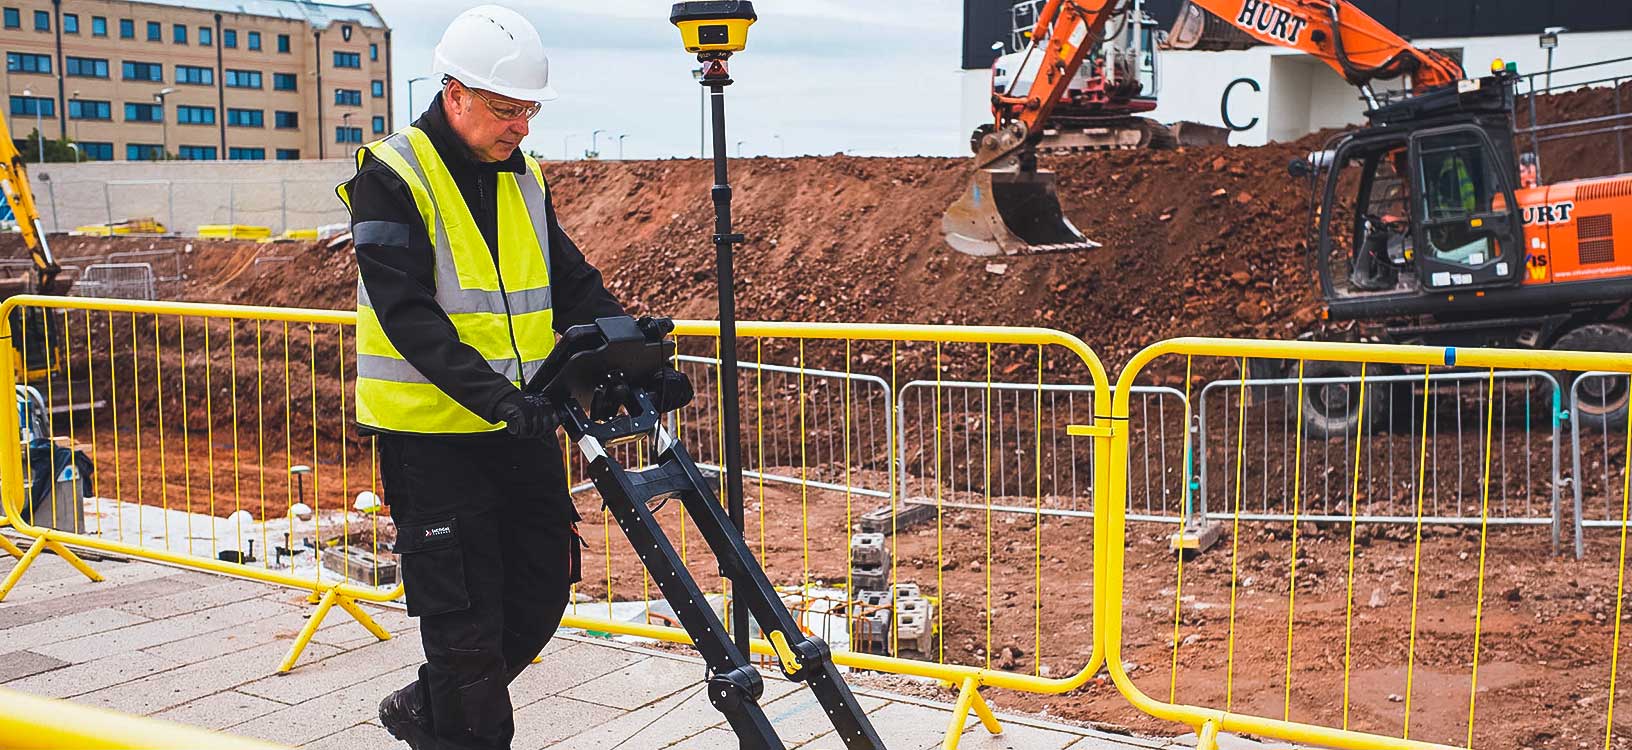 utility surveyor on a construction site capturing underground information with the Leica DSX